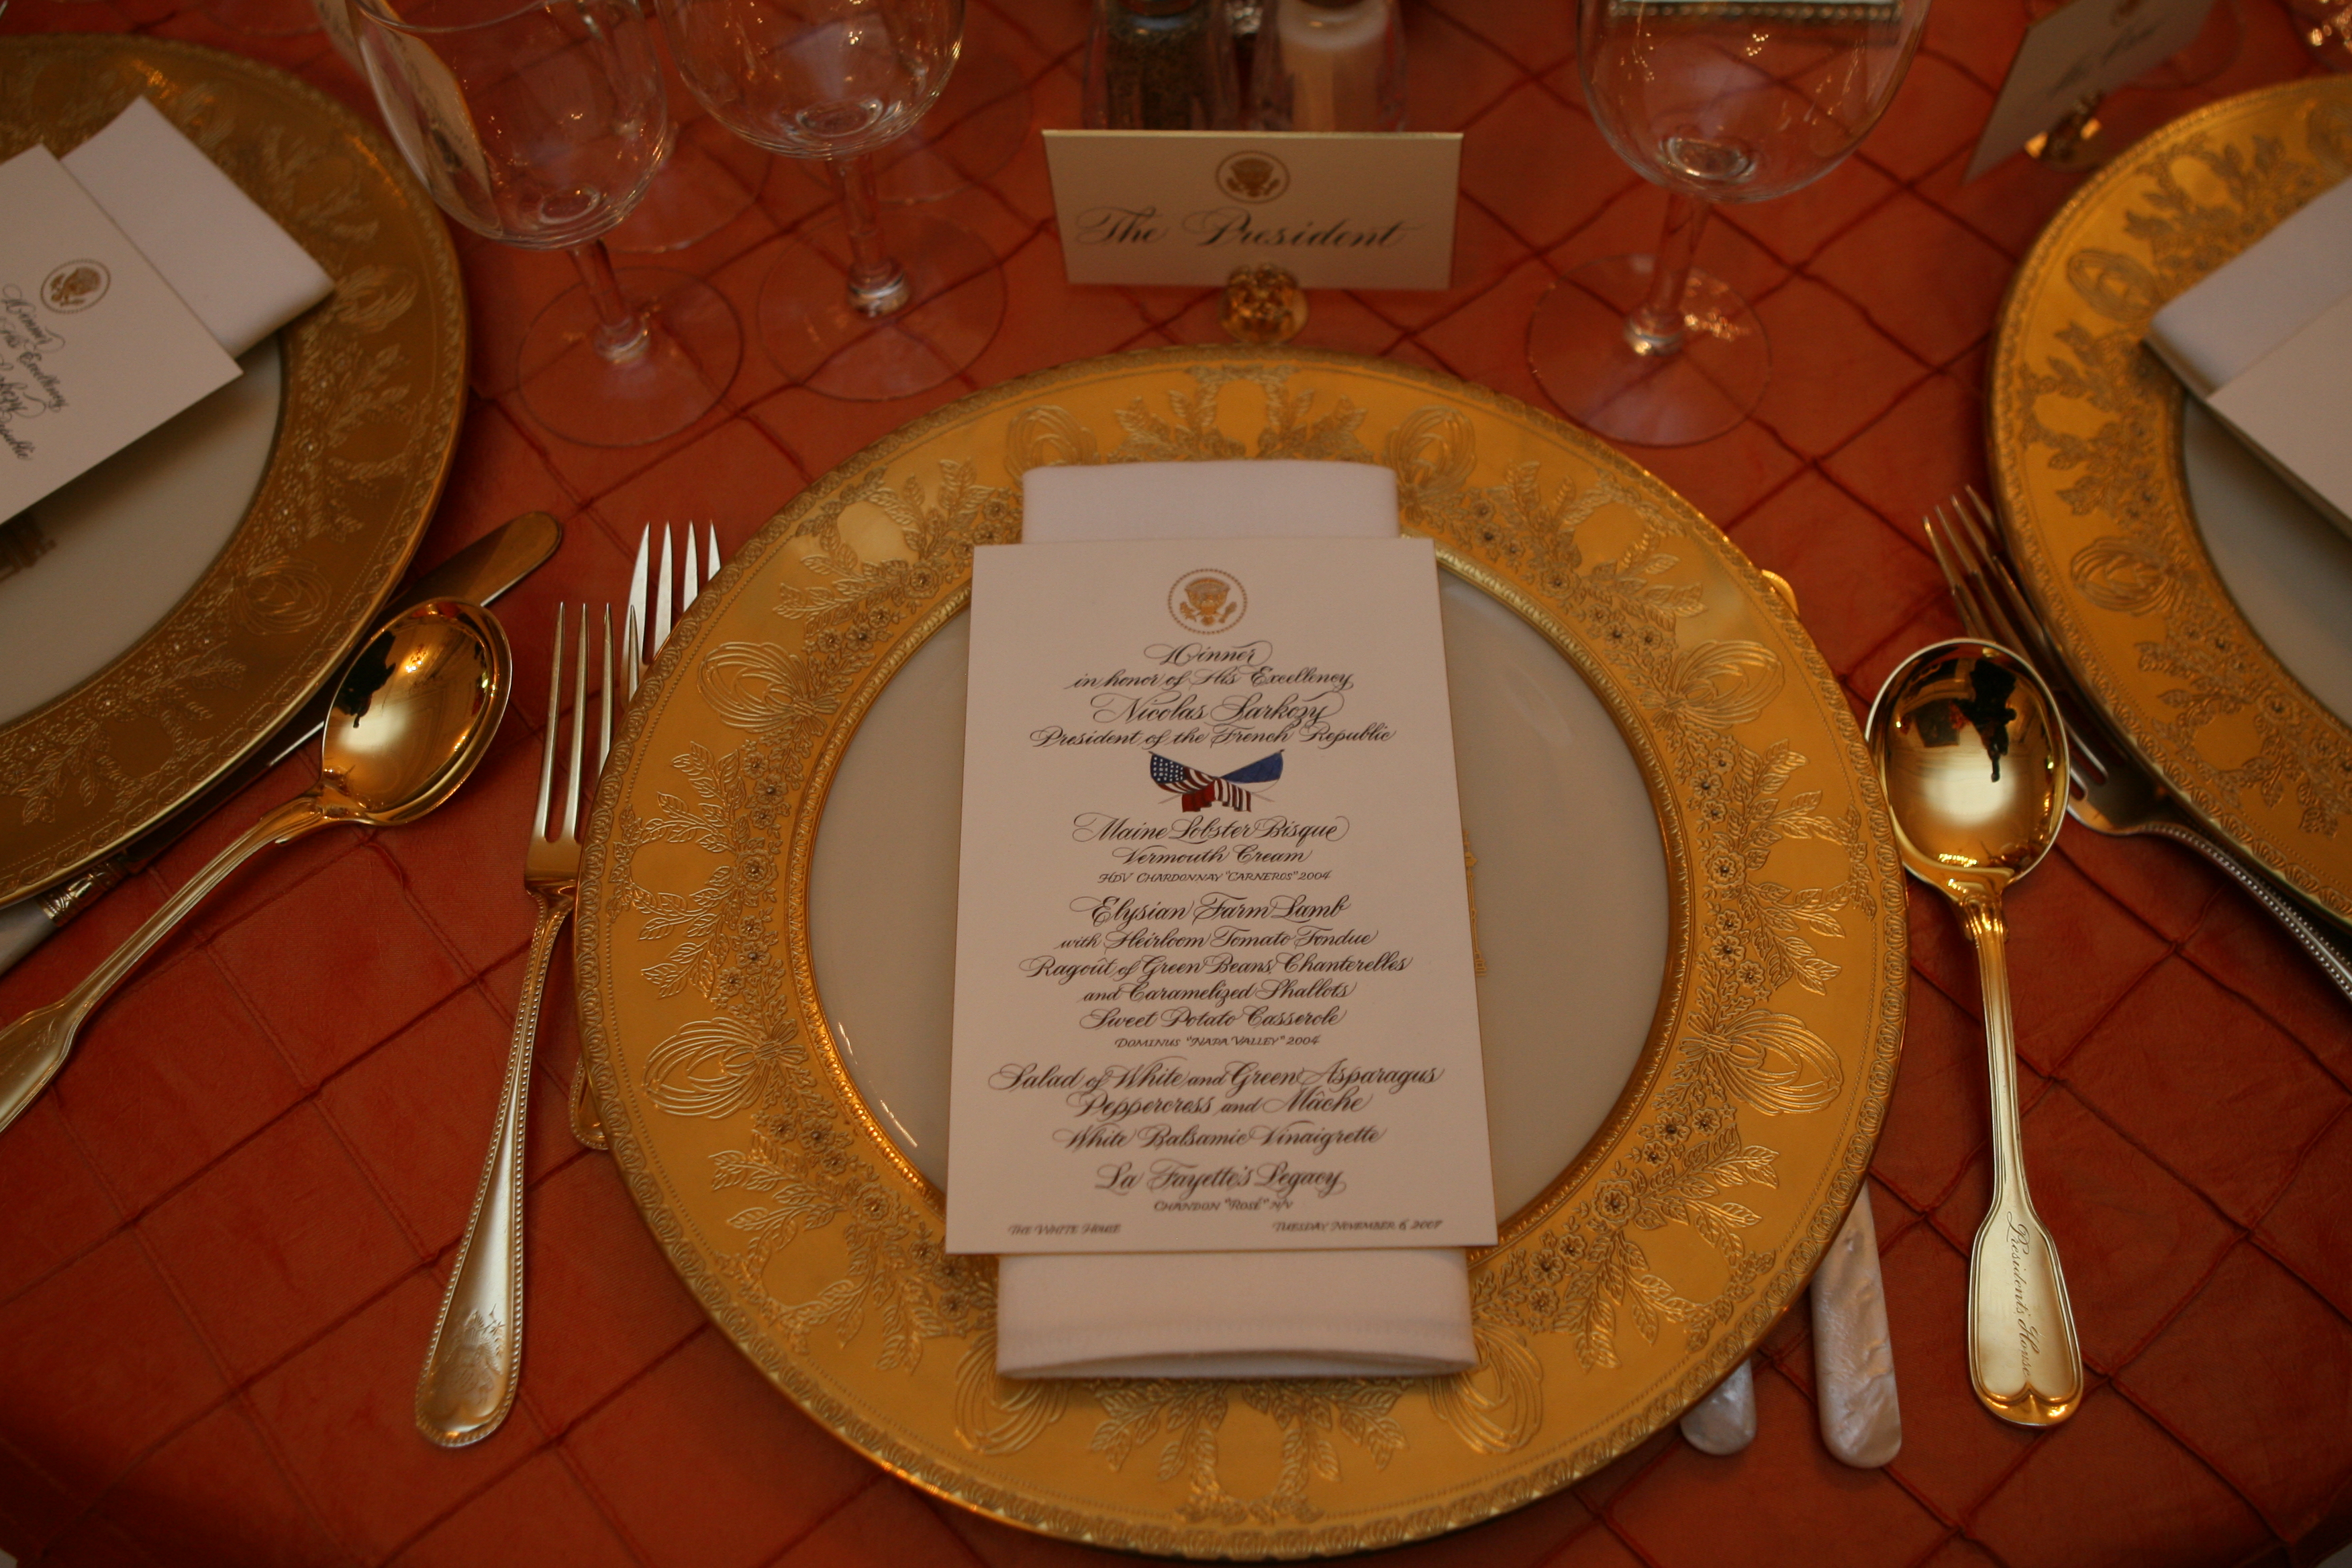 The dinner setting for President George W. Bush is seen, November 6, 2007, in the State Dining Room of the White House for the dinner in honor of French President Nicolas Sarkozy.